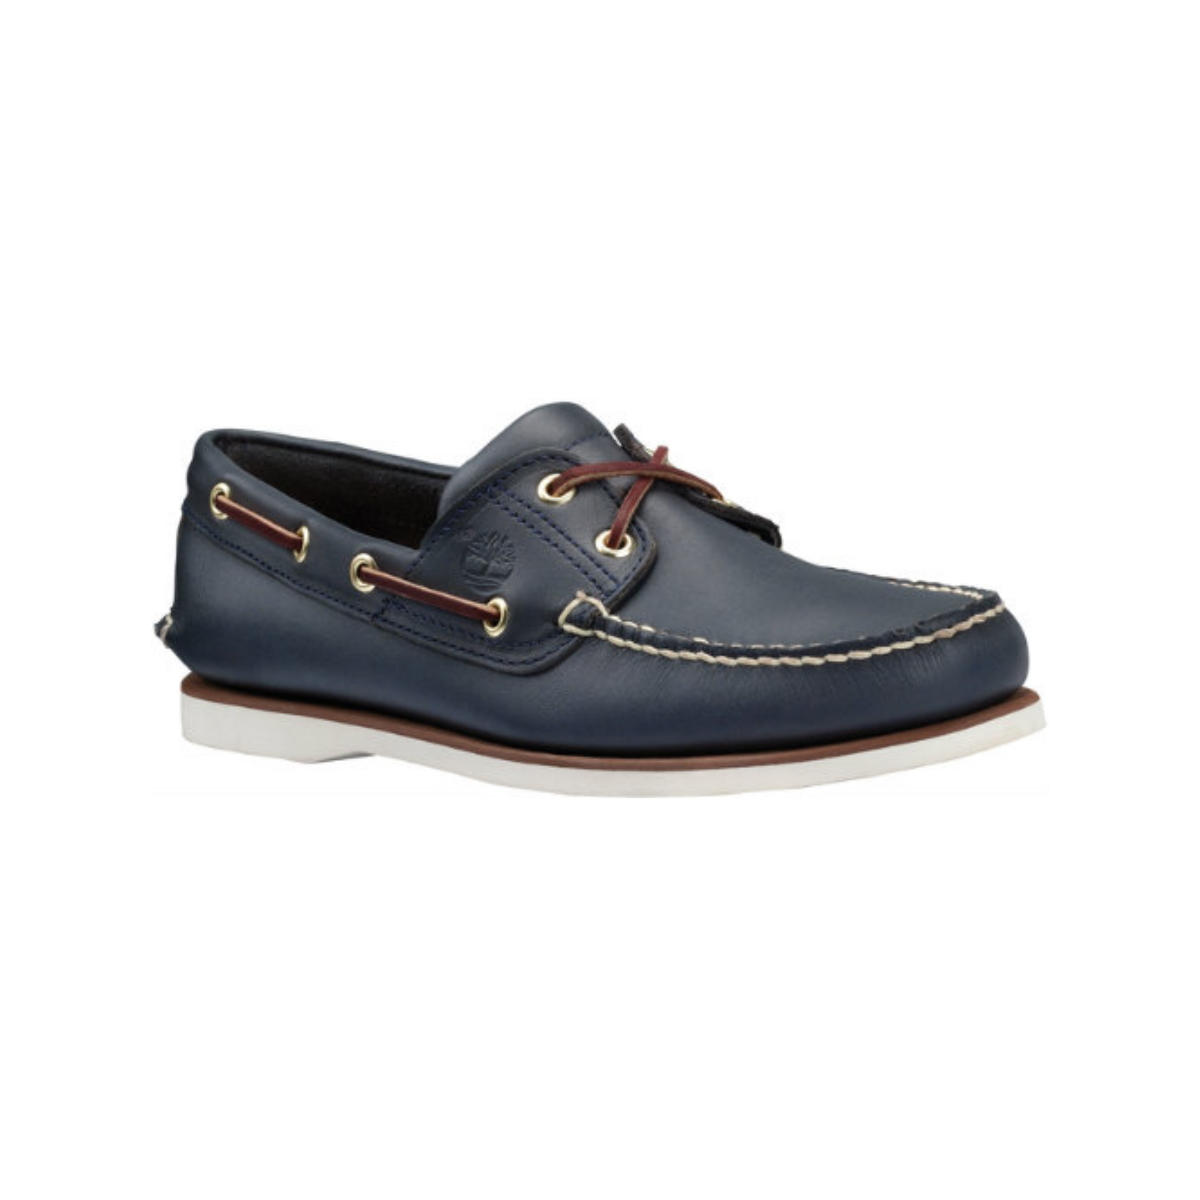 Timberland Classic Boat chaussures bateau homme navy eu 41,5 ( us 8 )